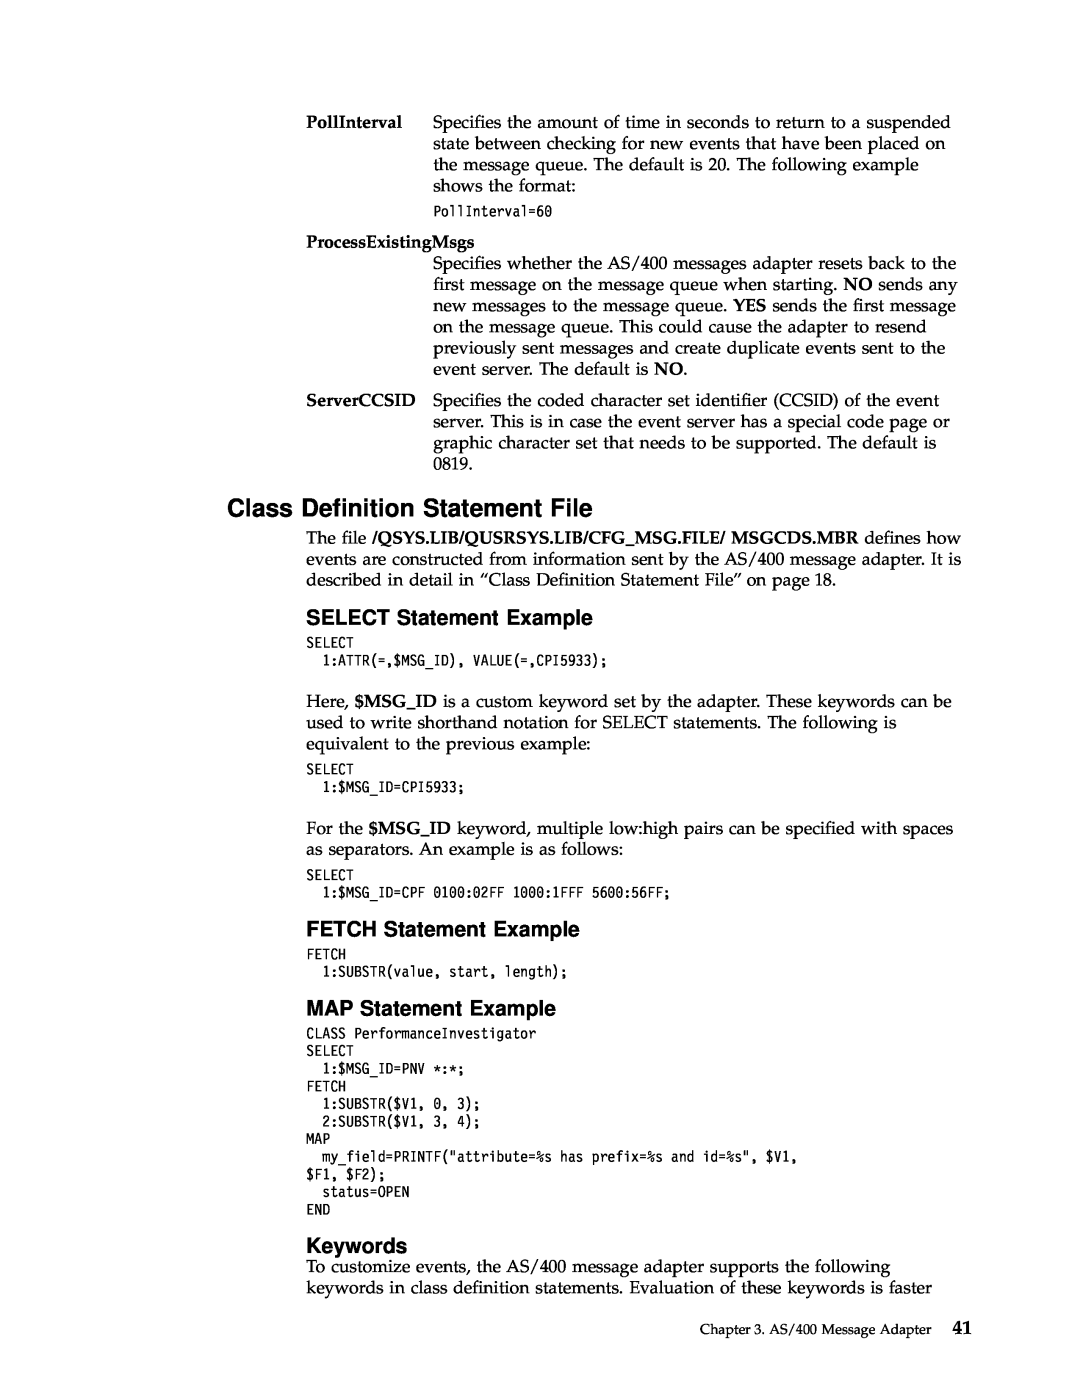 IBM Enterprise Console manual MAP Statement Example, Class Definition Statement File, SELECT Statement Example, Keywords 